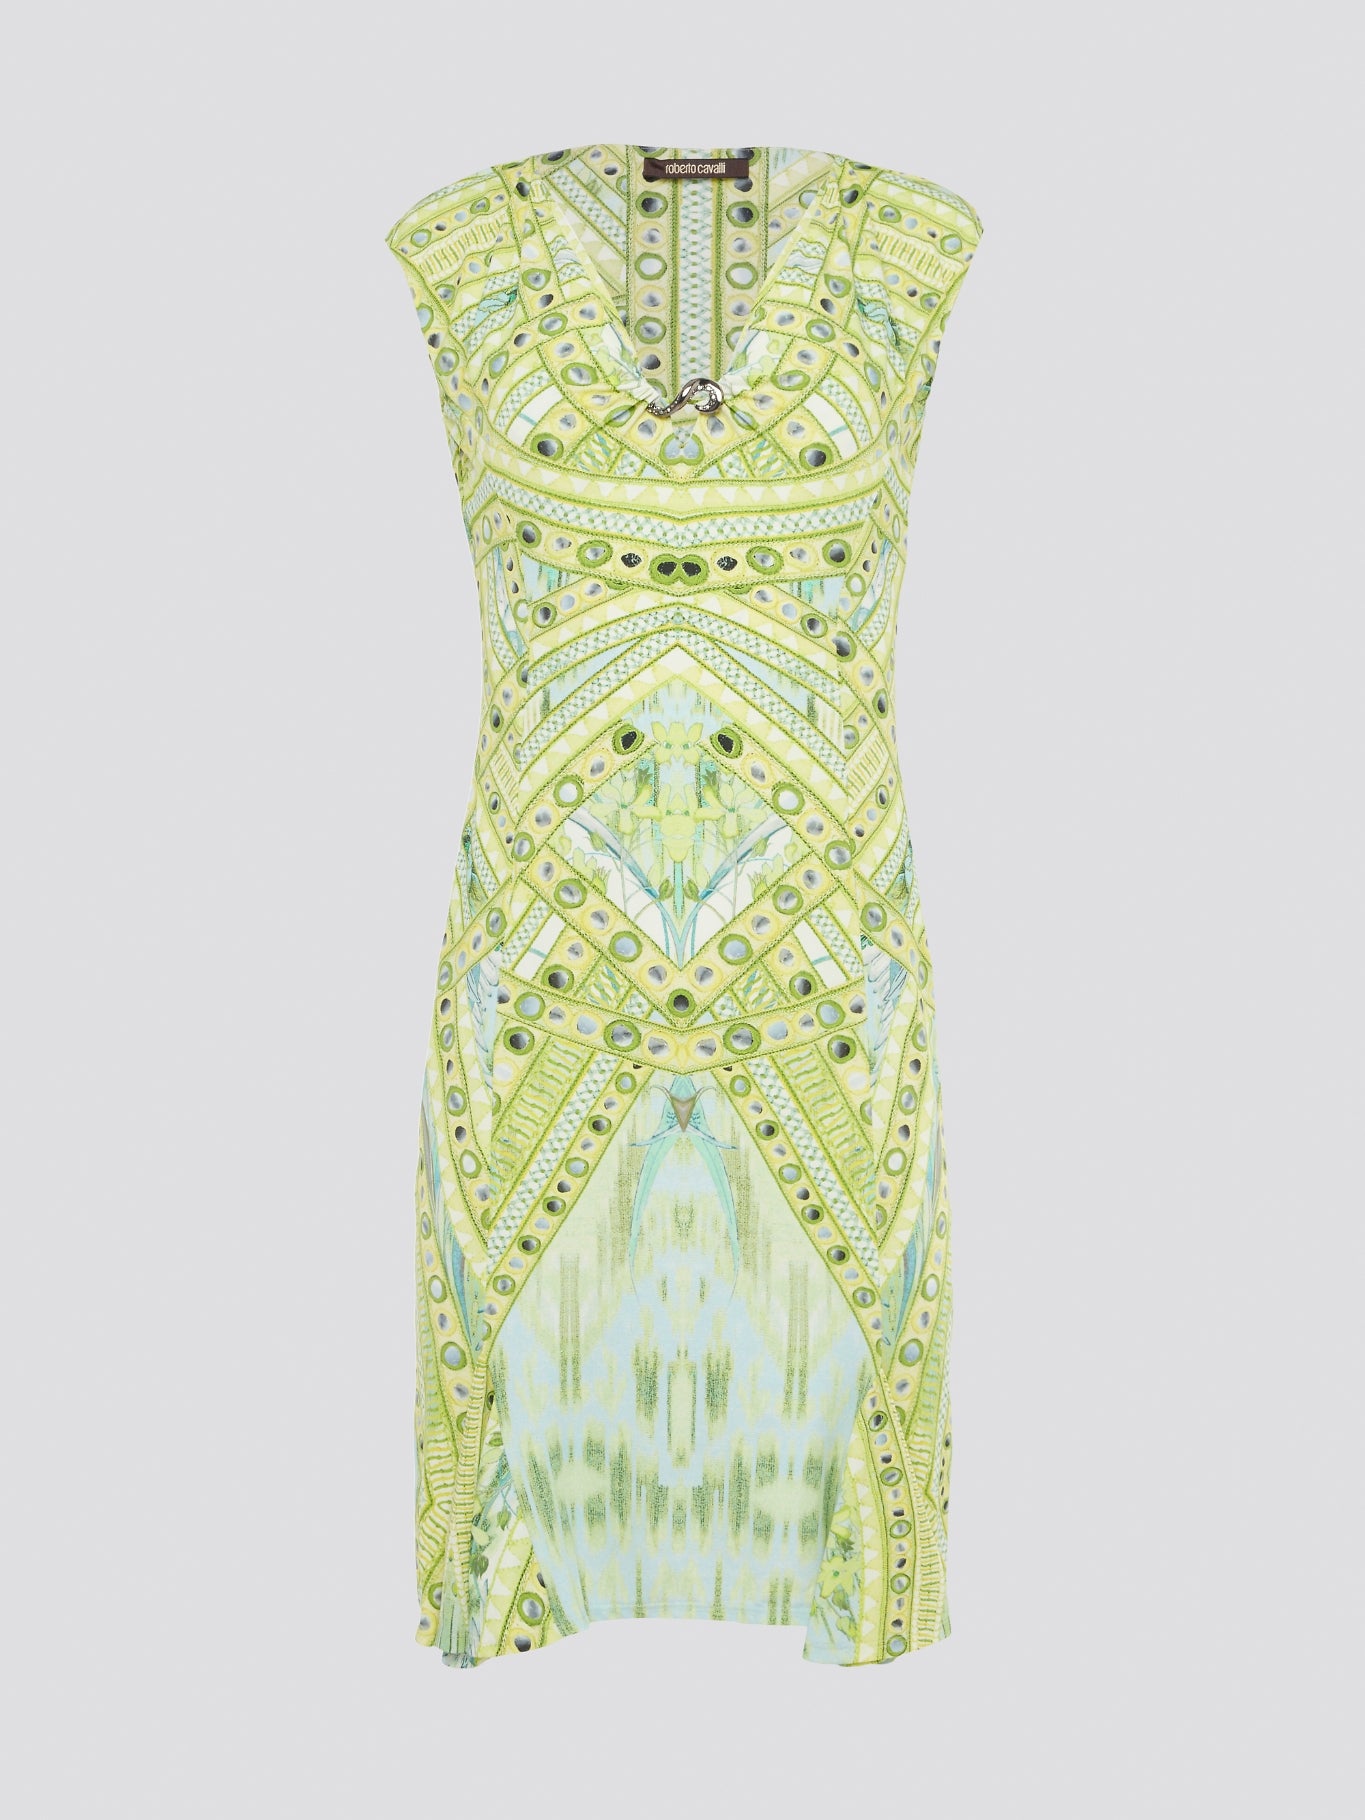 Embrace your inner goddess with this stunning Green Printed Sleeveless Dress from Roberto Cavalli. The intricate floral pattern and bold green hue will turn heads wherever you go, making you feel like a true fashion icon. Perfect for summer weddings, garden parties, or even a night out on the town, this dress is a must-have for any fashion-forward woman.